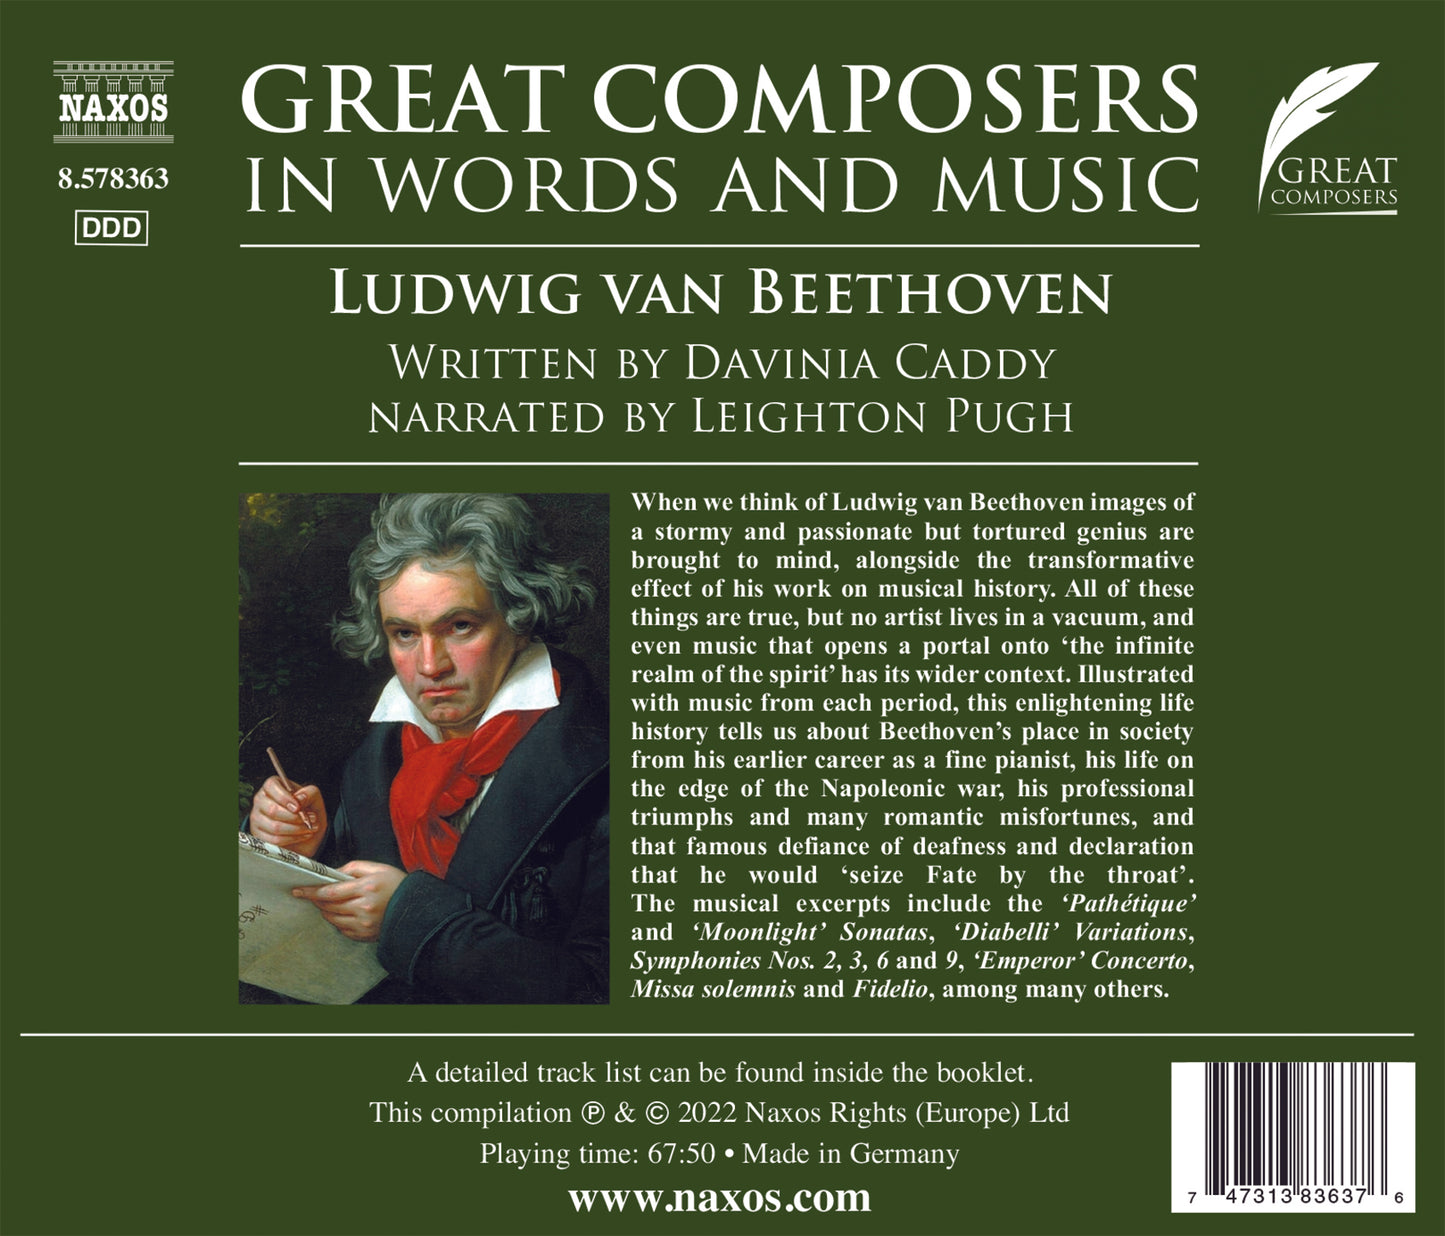 Beethoven: Great Composers In Words & Music  Various